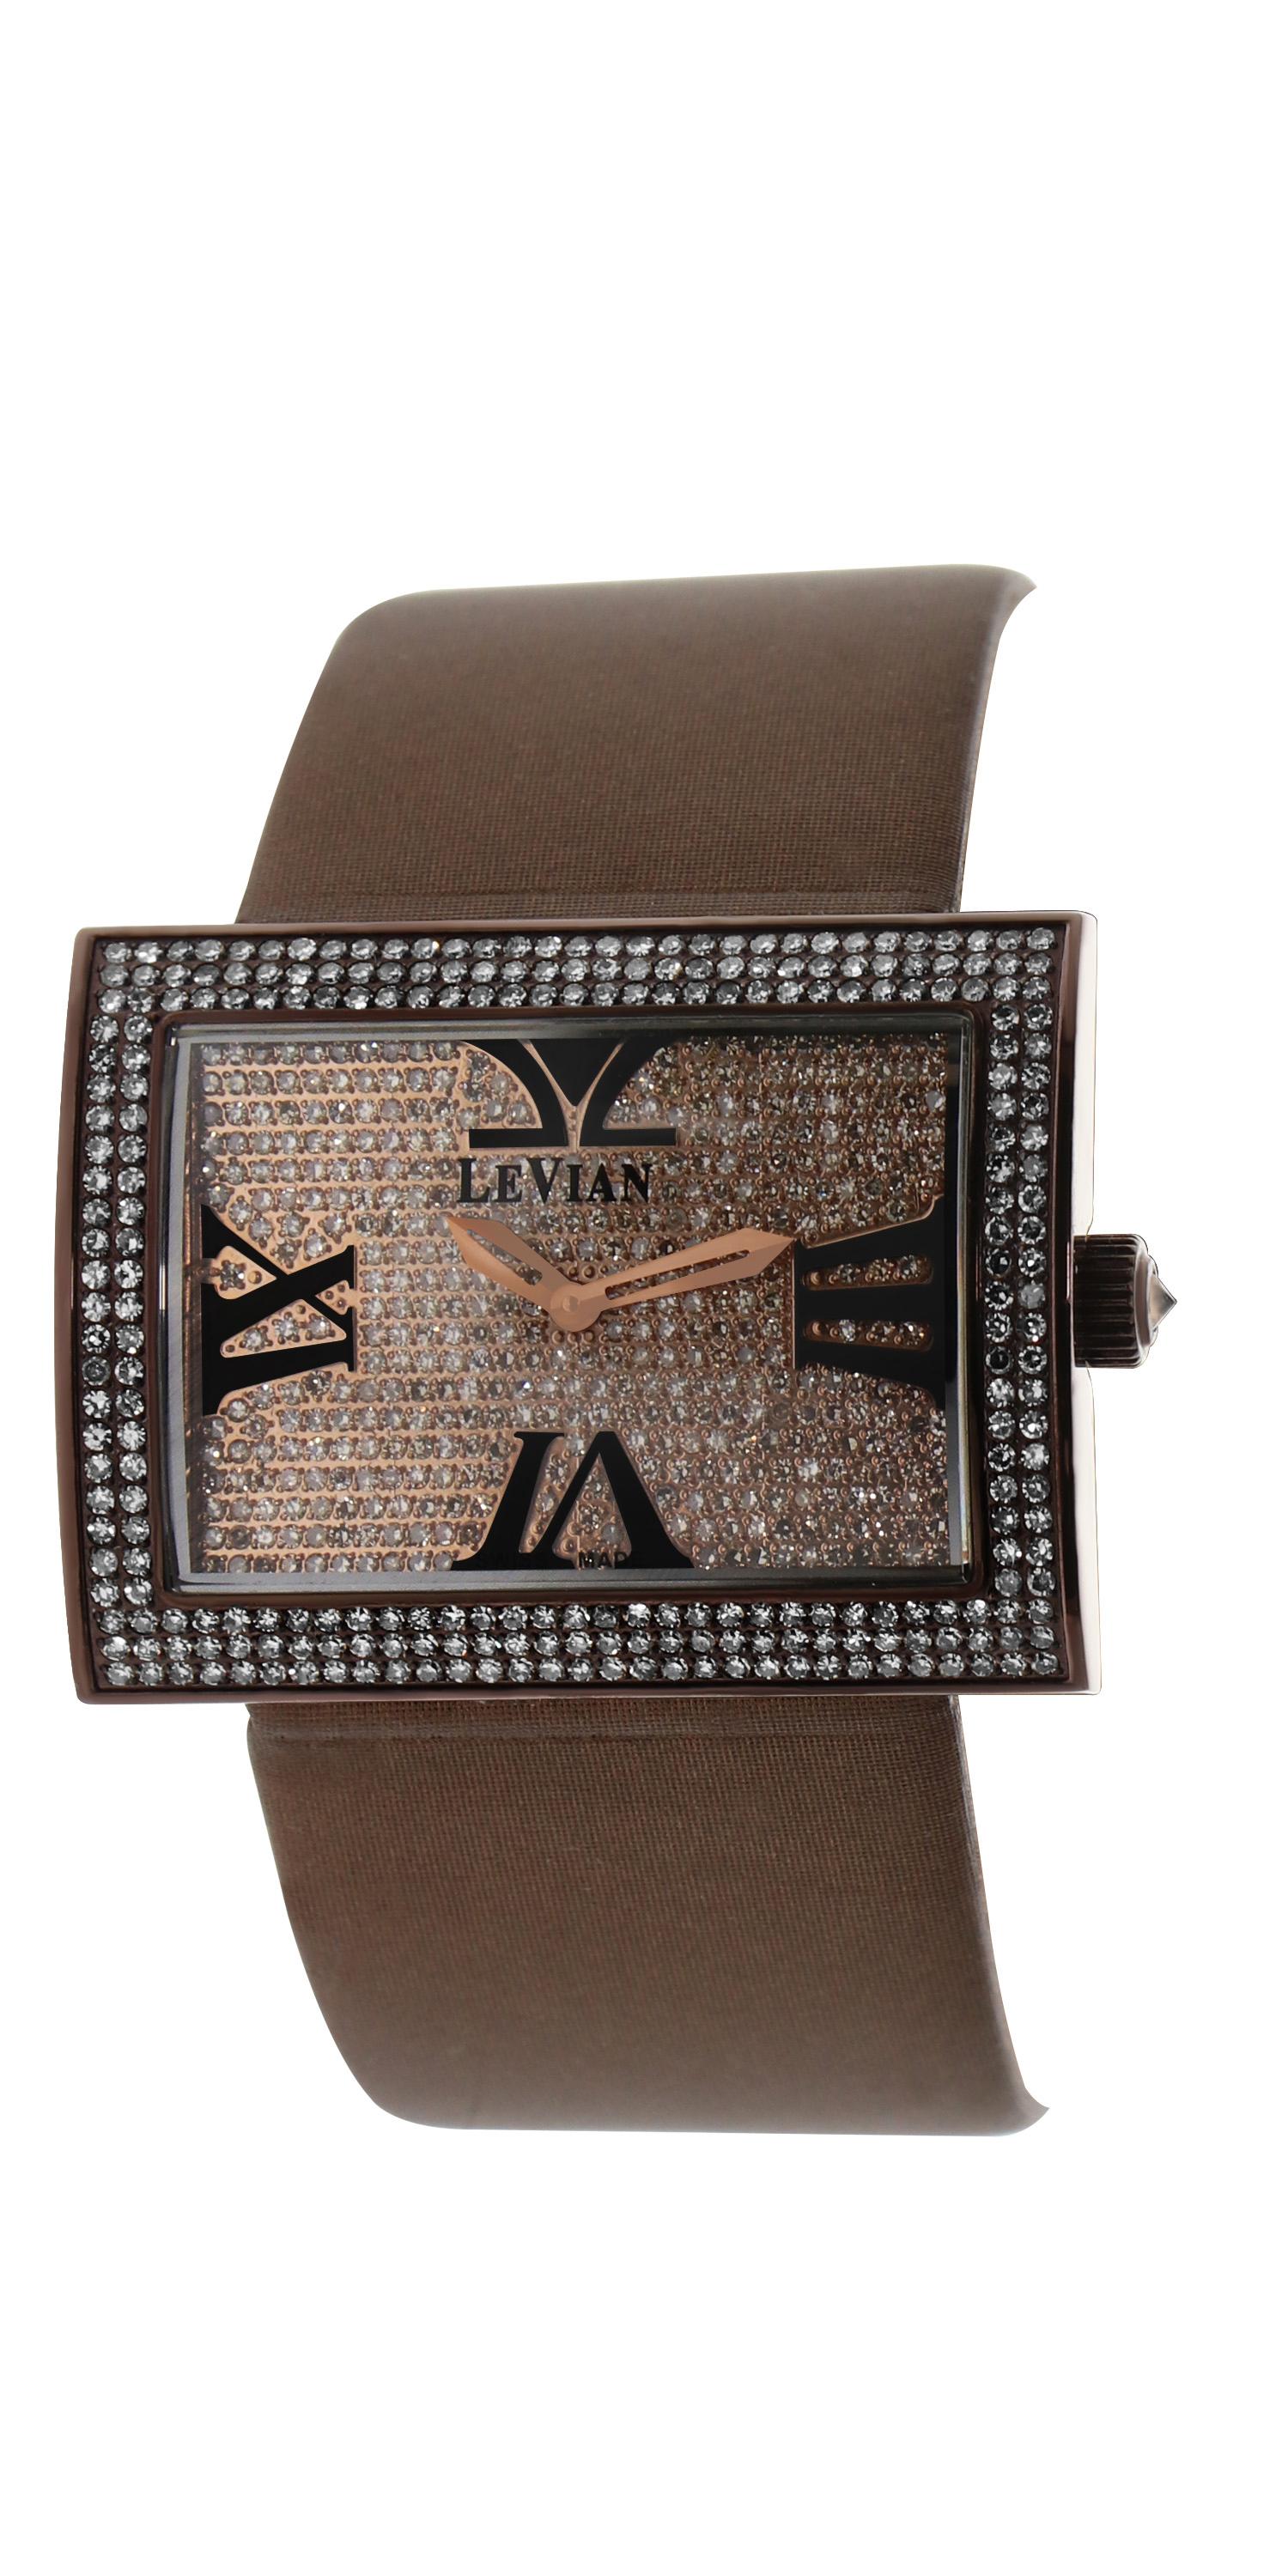 Le Vian 42.5mm Rectangle Ladies' Wristwatch featuring 4.52cts of Chocolate Diamonds in Chocolate Stainless Steel with a leather Band.